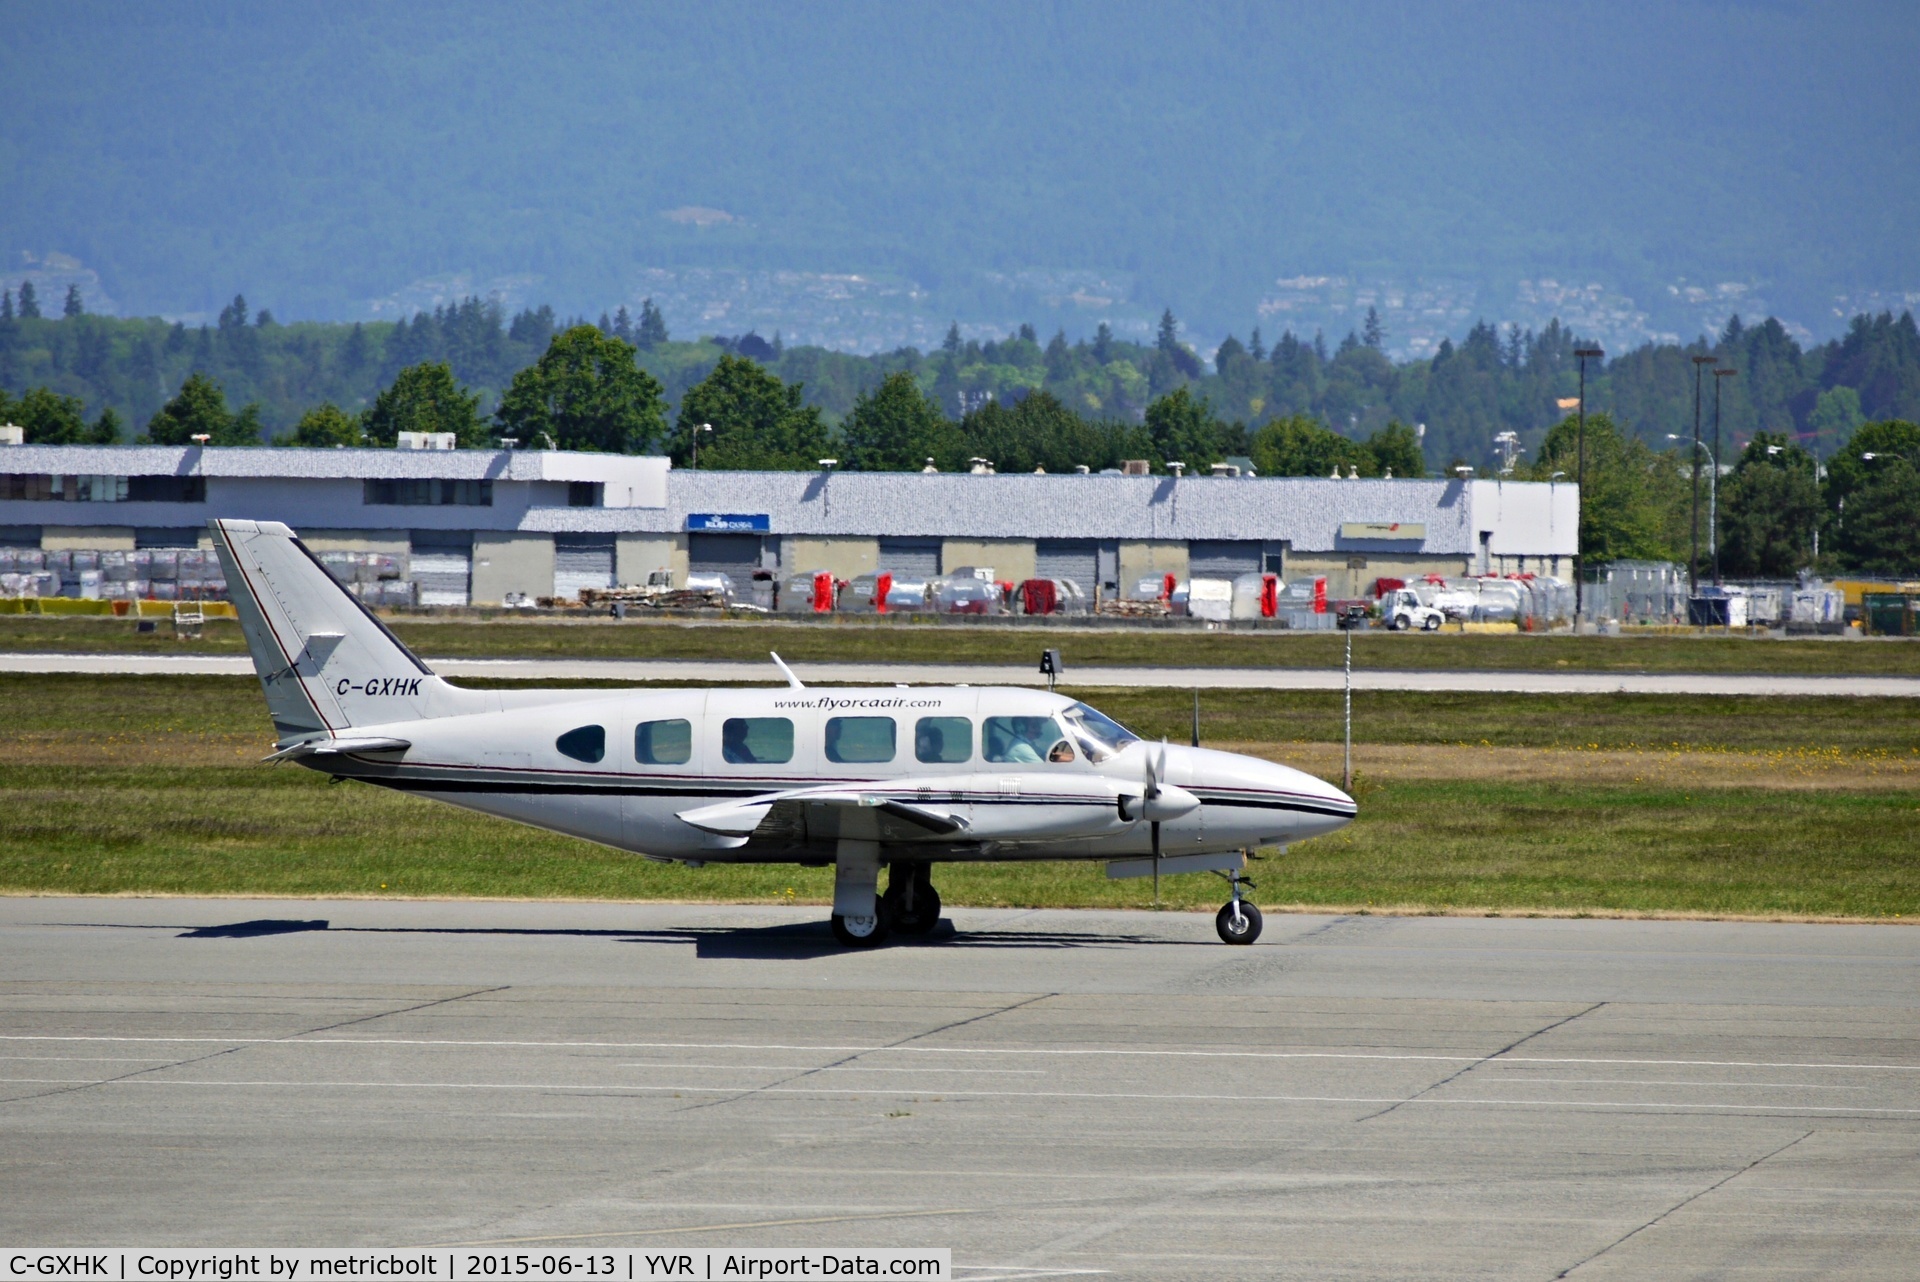 C-GXHK, 1977 Piper PA-31-350 Chieftain C/N 31-7752108, Seen at YVR